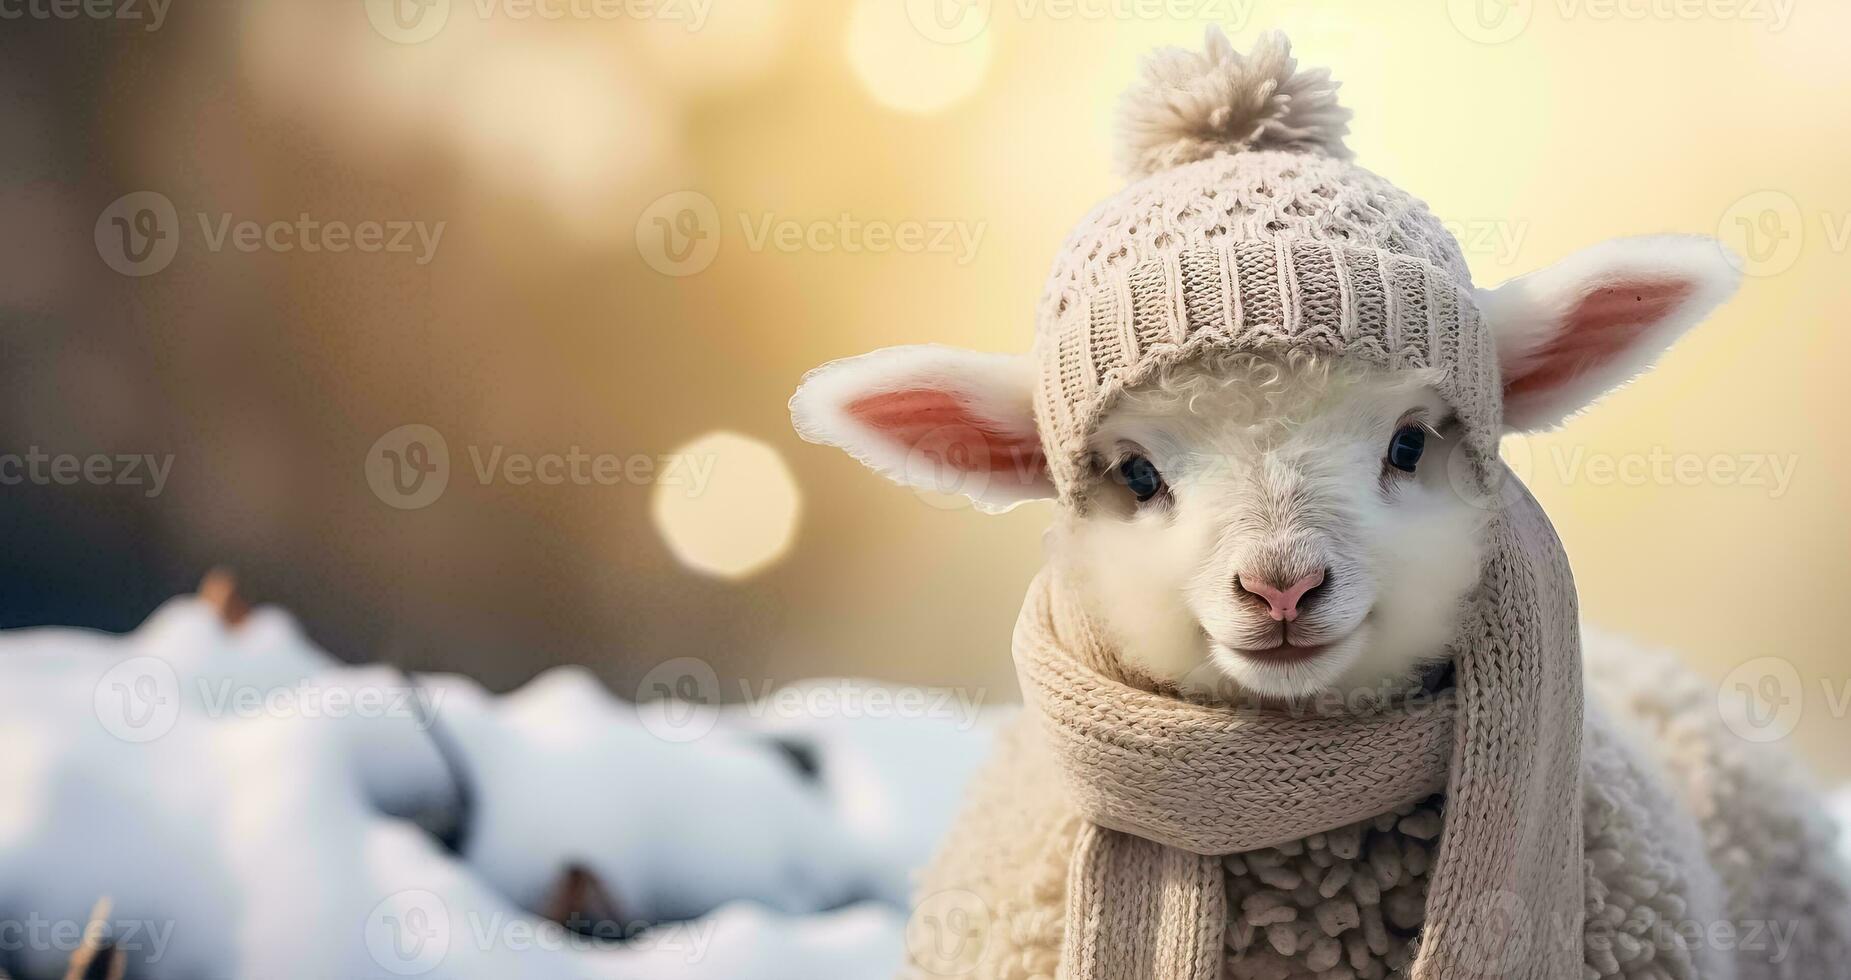 Cute sheep wearing knitted scarf and beanie adds a touch of humor to the cold winter weather photo